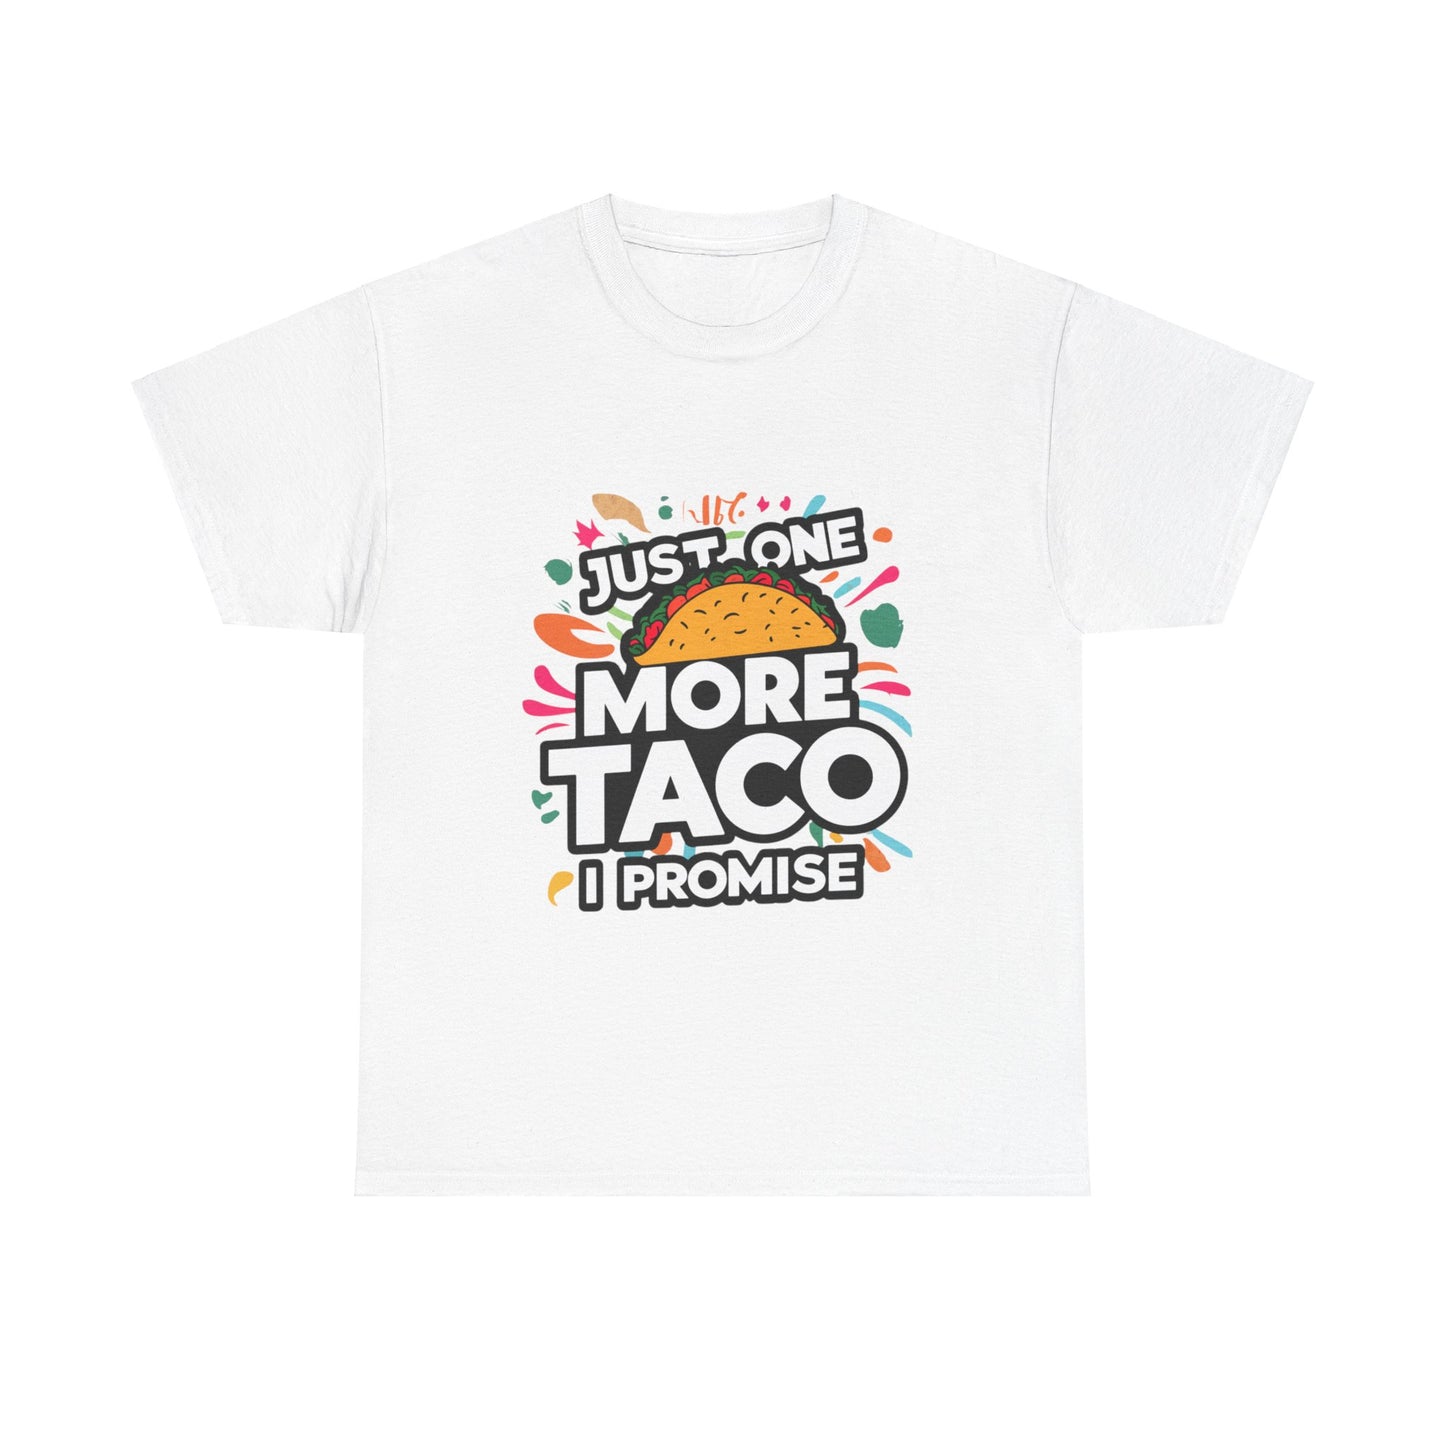 Just One More Taco I Promise Mexican Food Graphic Unisex Heavy Cotton Tee Cotton Funny Humorous Graphic Soft Premium Unisex Men Women White T-shirt Birthday Gift-10